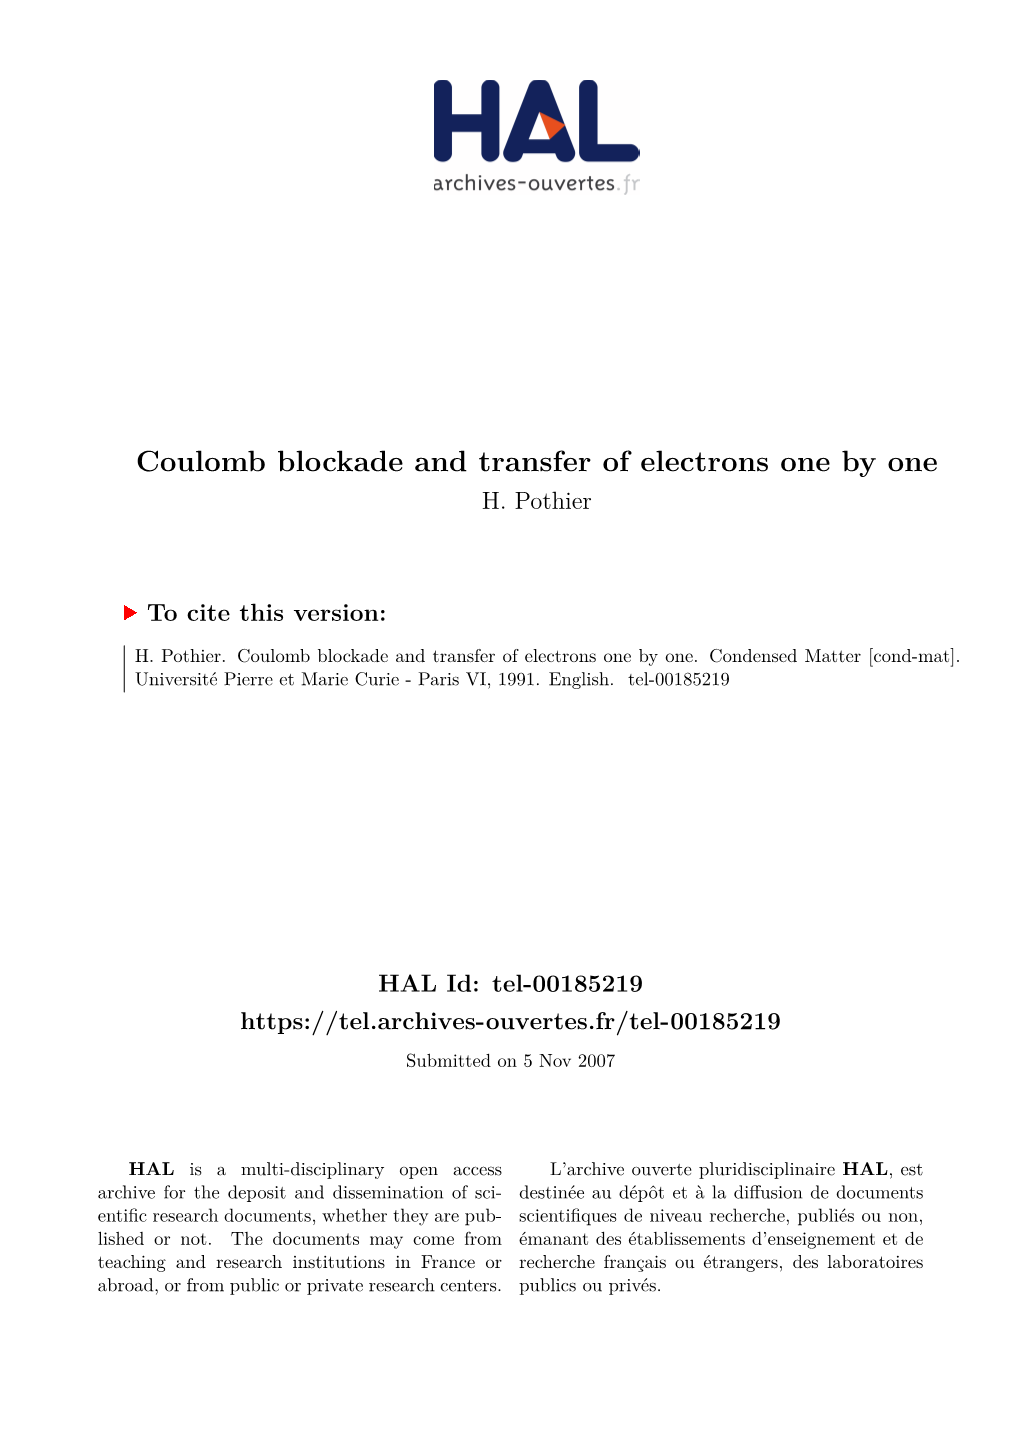 Coulomb Blockade and Transfer of Electrons One by One H